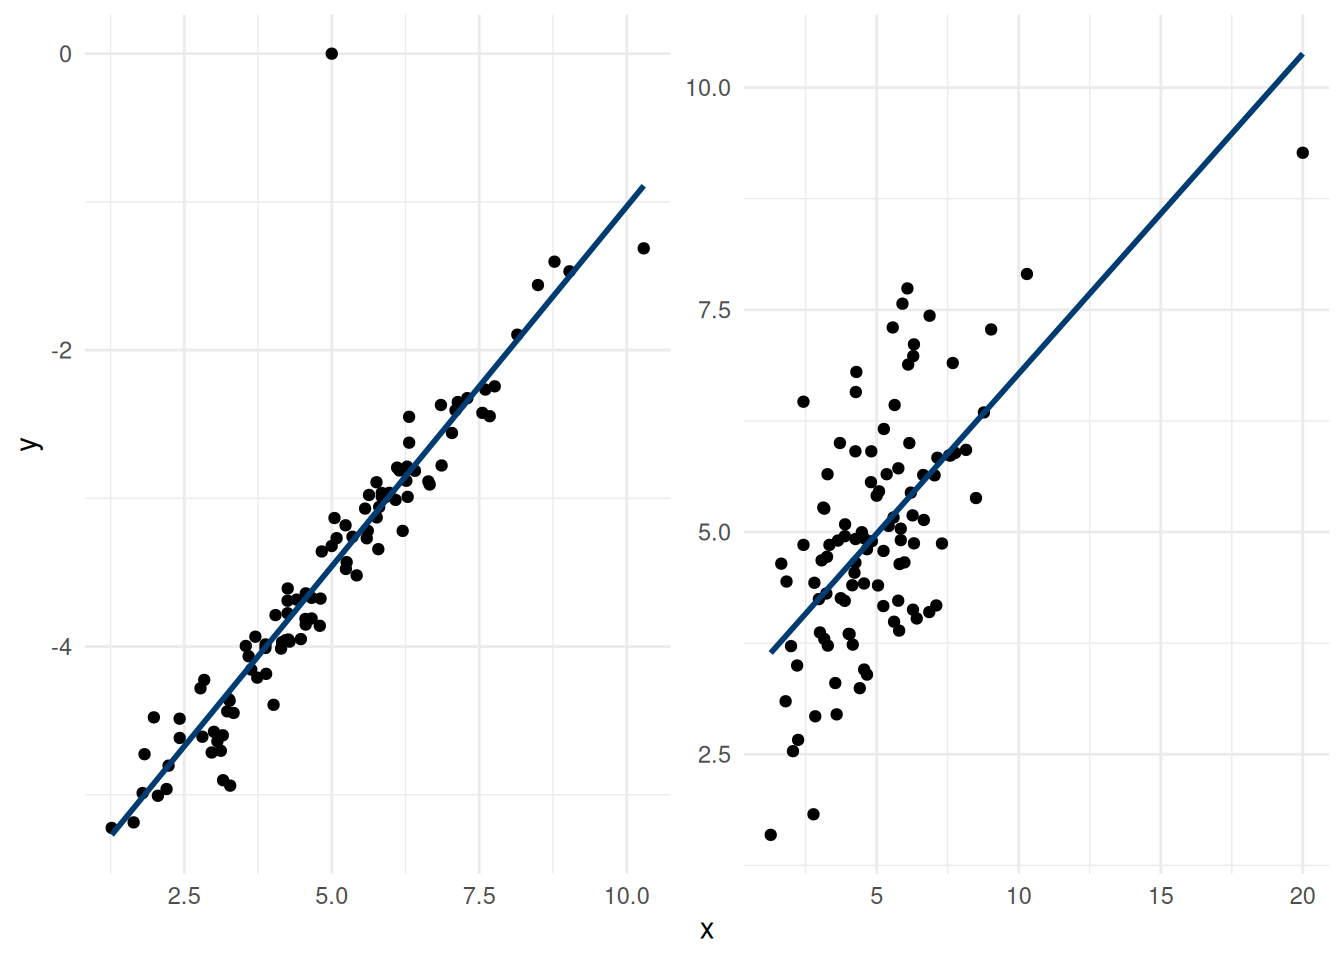 Outlier and influential observation. The left panel shows an outlier, whereas the right panel shows an influential variable (rightmost $x$ value).